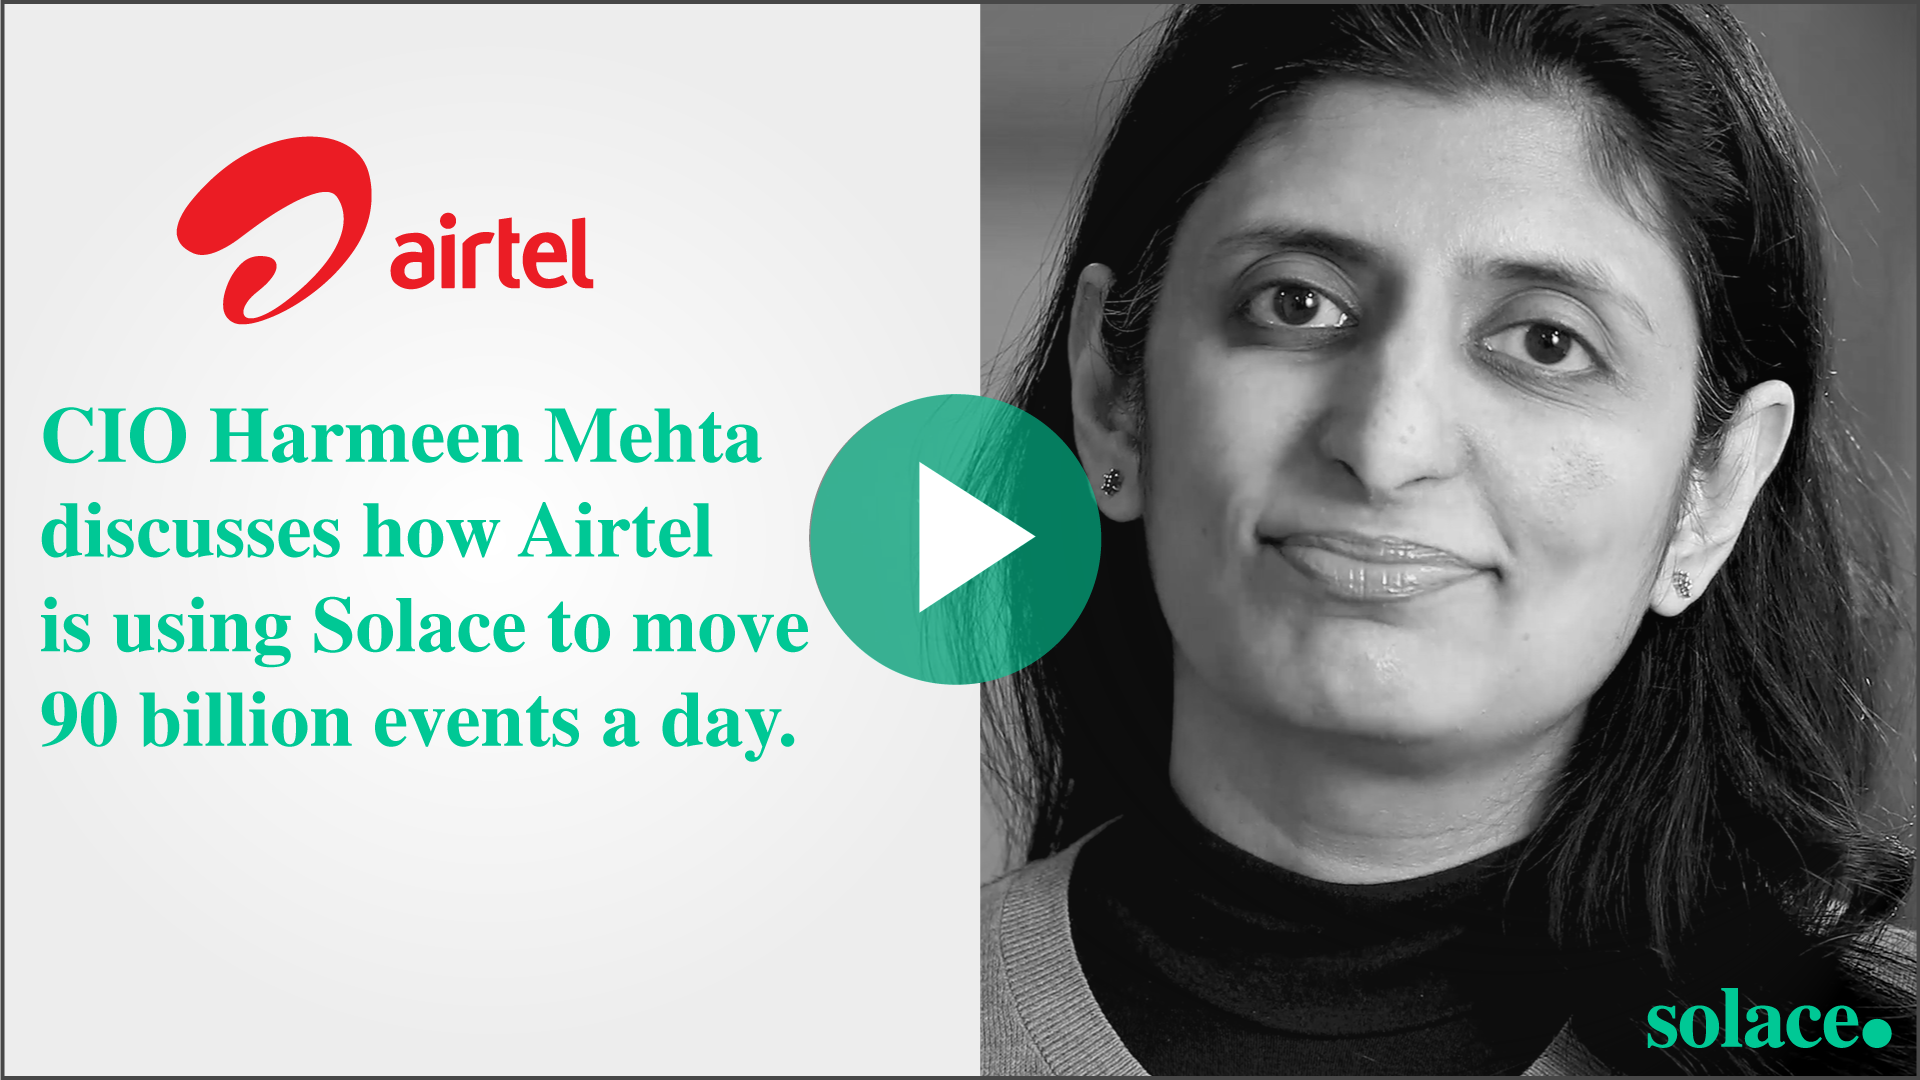 Airtel and Solace video